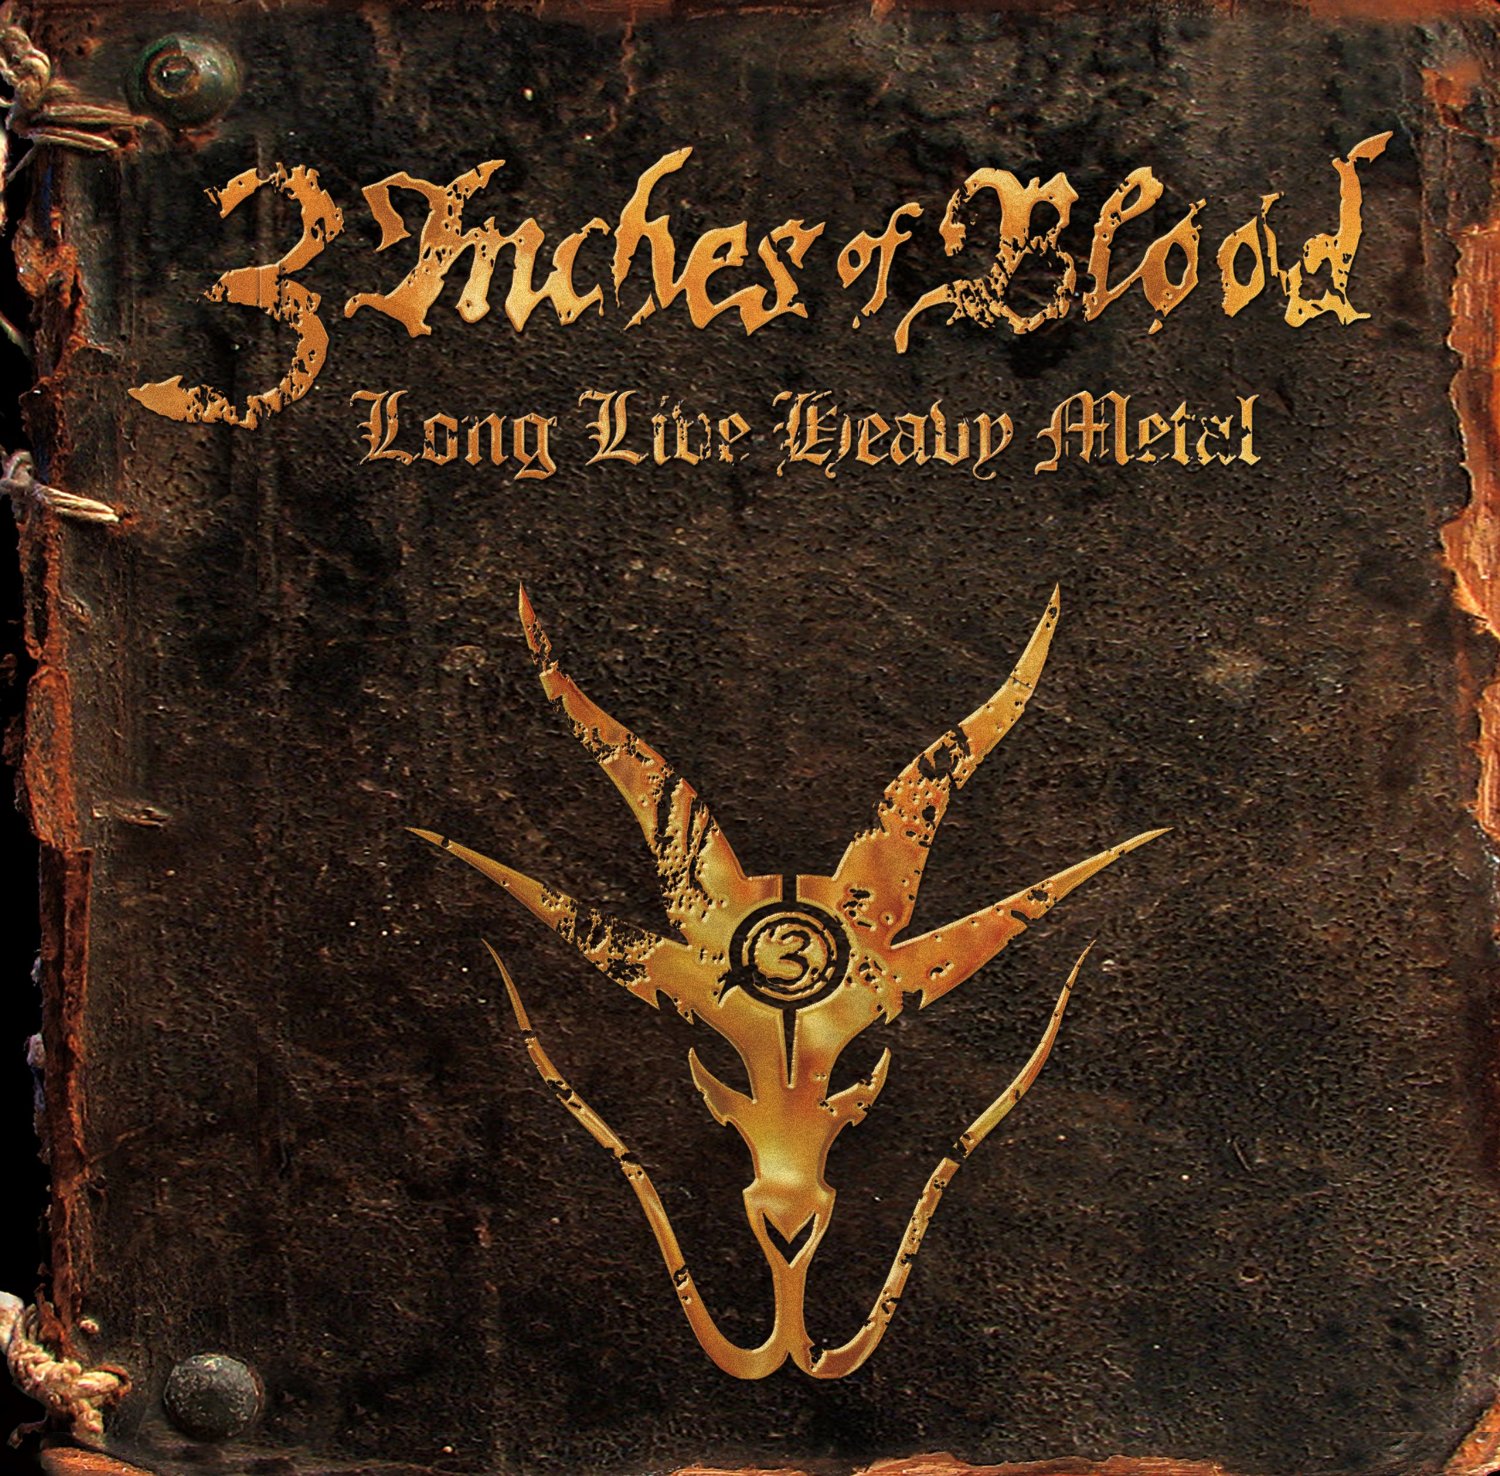 3 Inches Of Blood - Long Live Heavy Metal (Special Ed.)